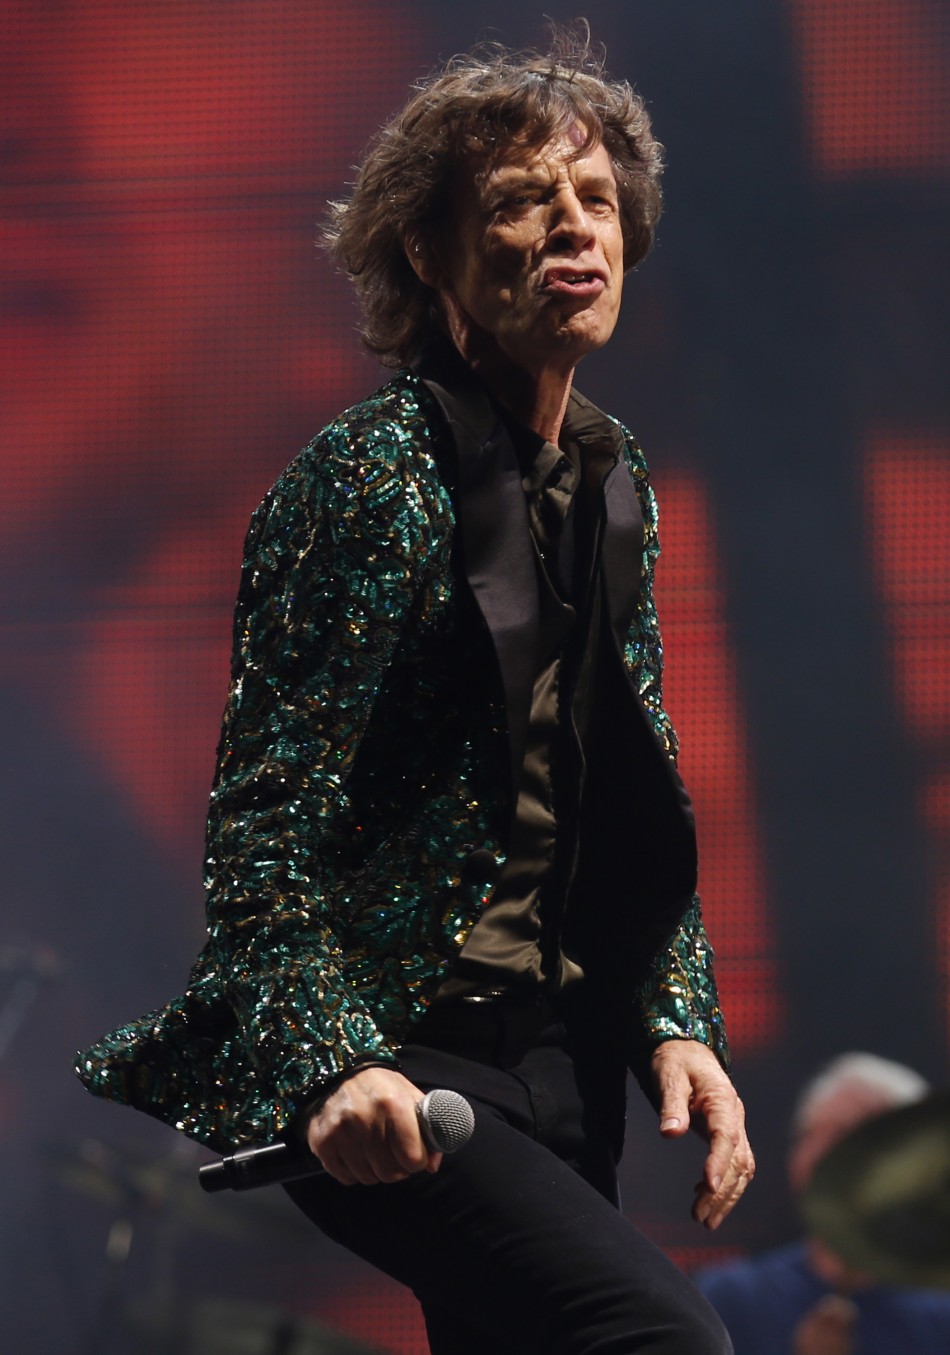 Mick Jagger of the Rolling Stones performs on the Pyramid Stage at Glastonbury music festival at Worthy Farm in Somerset, June 29, 2013.